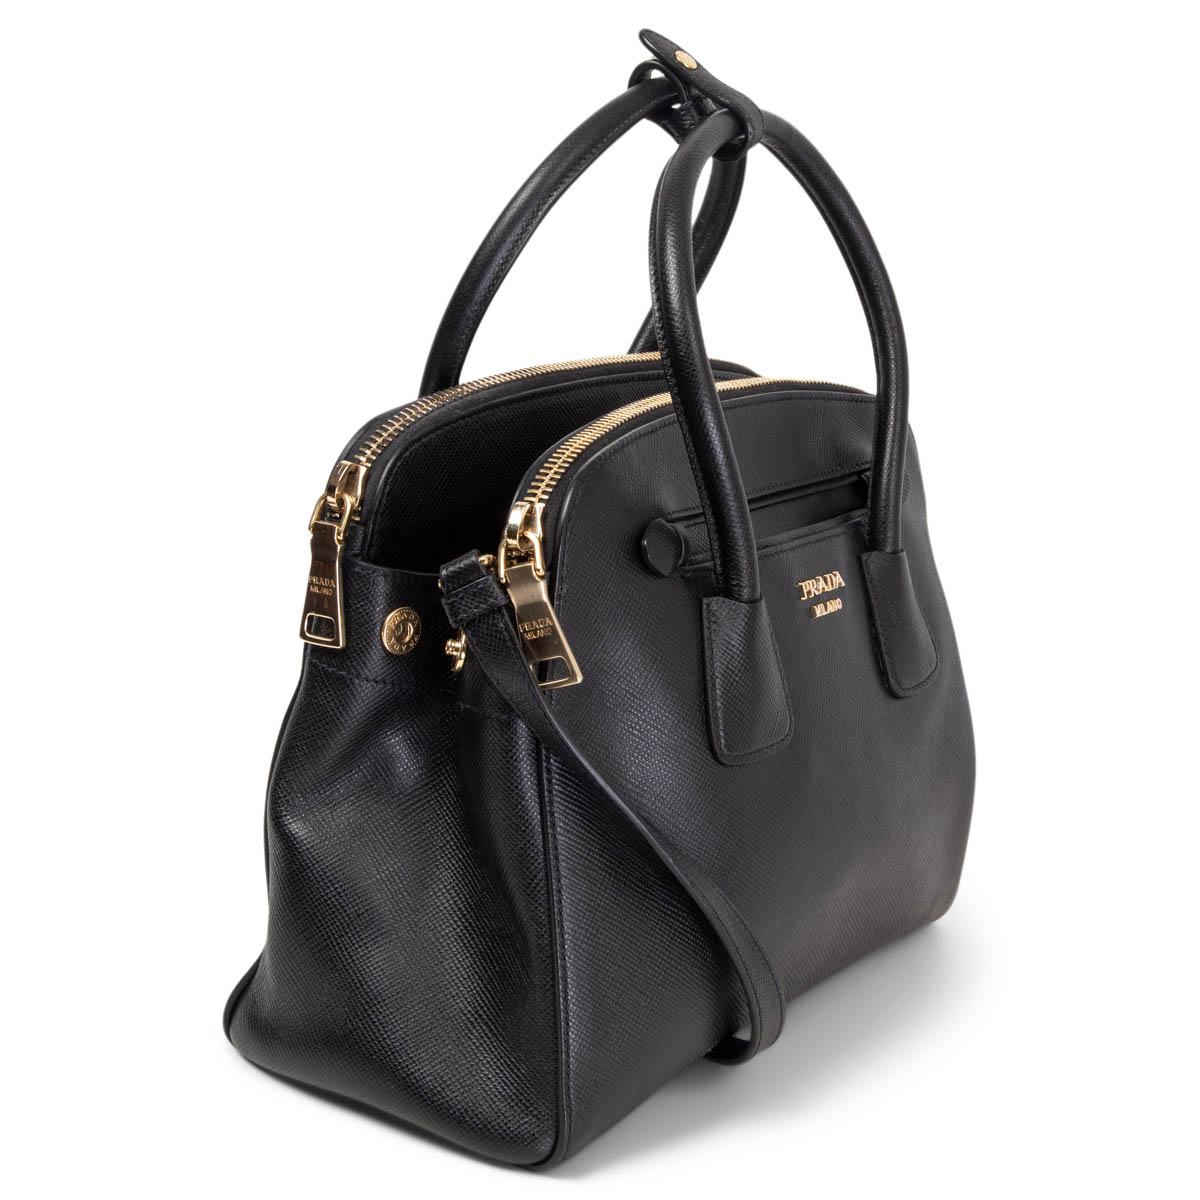 100% authentic Prada Double Zipper Tote in black Saffiano Lux leather and silver-tone hardware. Designed with two outside slip pockets and zipper pockets. The middle main compartment opens with a push-button. Lined in black logo nylon and leather